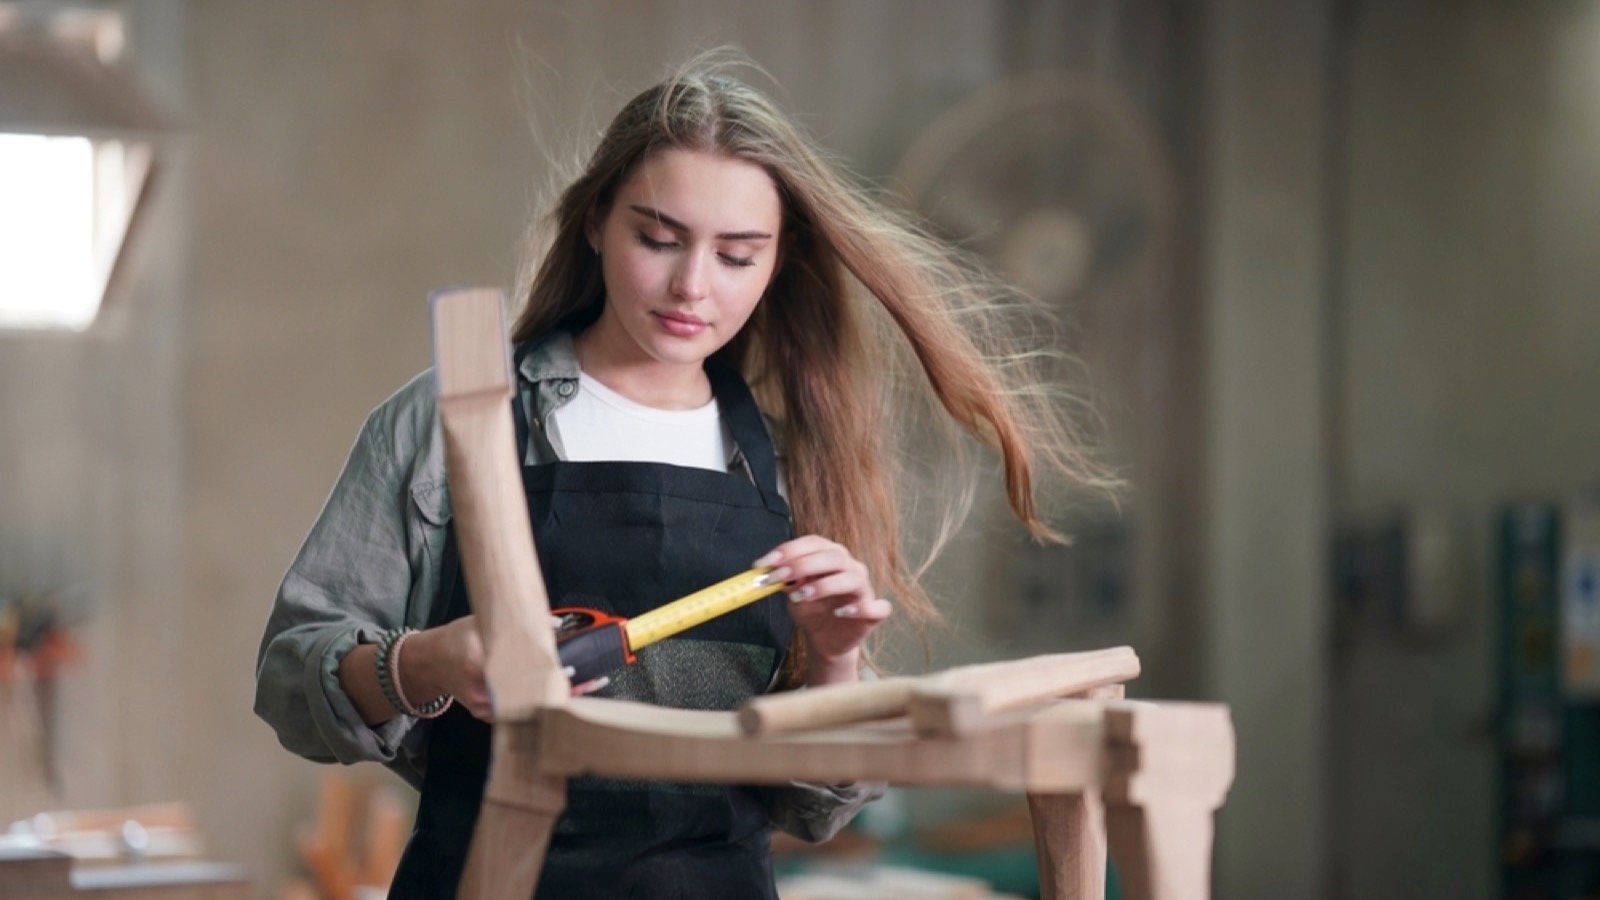 <p>If you’re already a skilled woodworker and have the tools at home, this is a great time to indulge in your favorite hobby. If you’re a novice, there are classes you can take to help develop those talents.</p><p>Many of us took woodworking classes in school. There was satisfaction in working with natural materials and producing a chess board or spice rack. You can feel that sense of achievement in adulthood, too.</p>